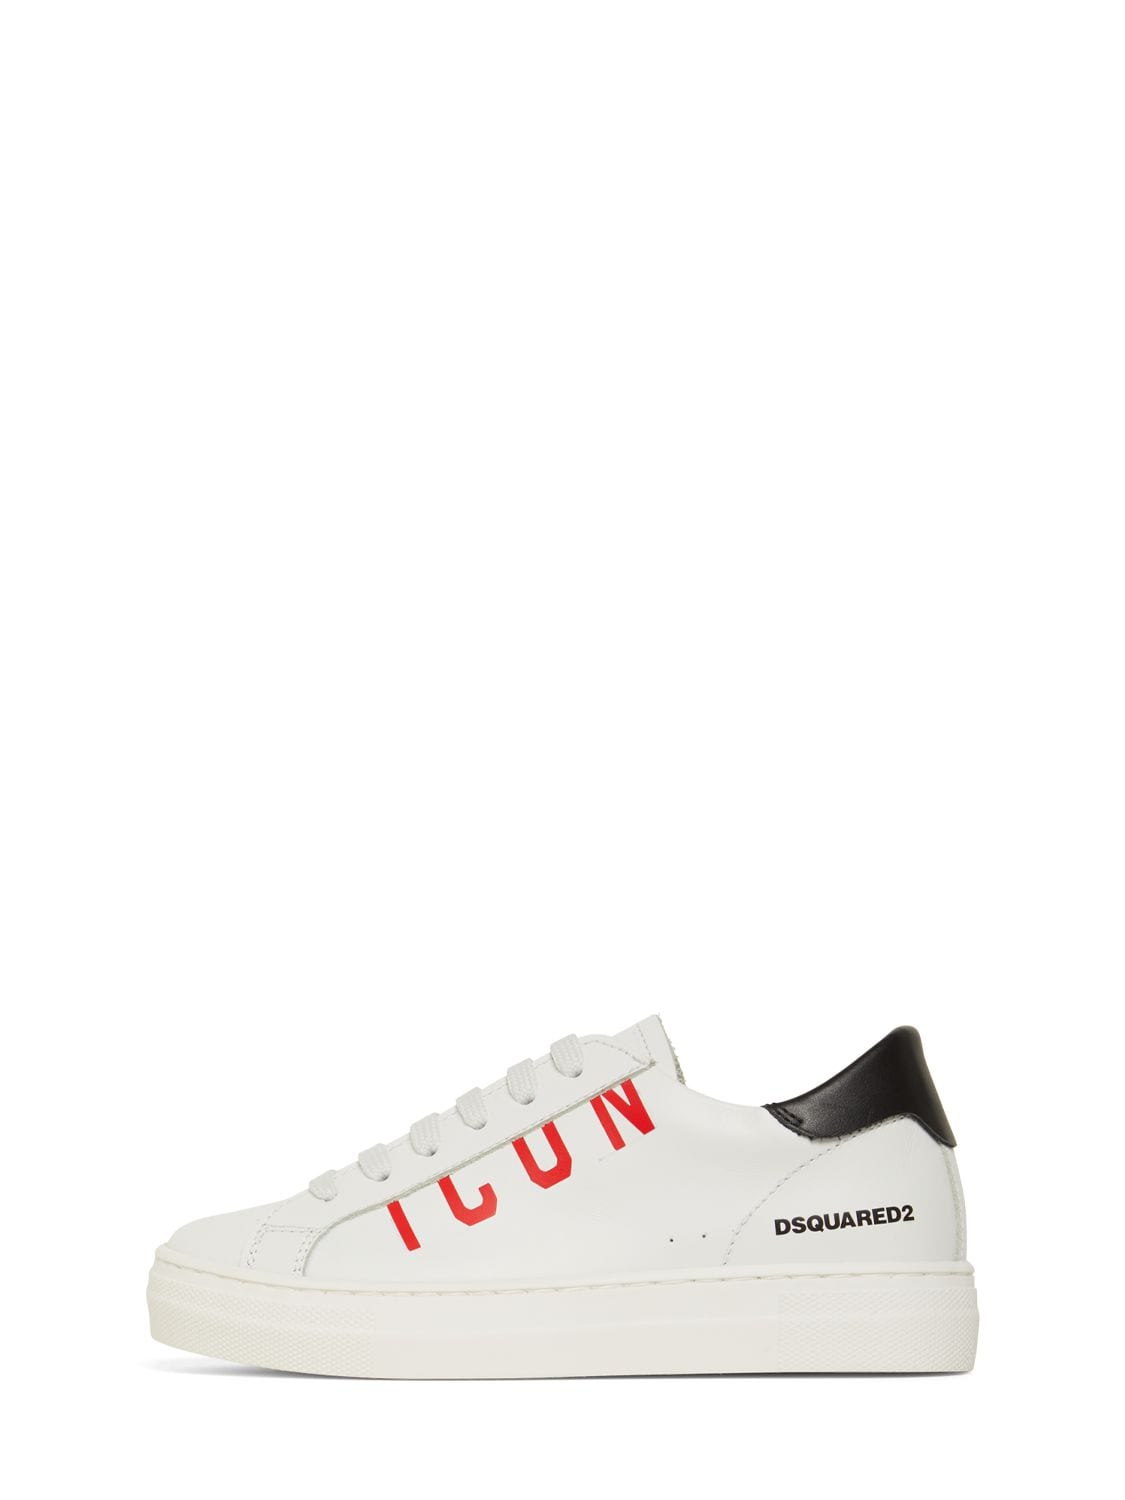 DSQUARED2 ICON LOGO PRINT LEATHER LACE-UP SNEAKERS